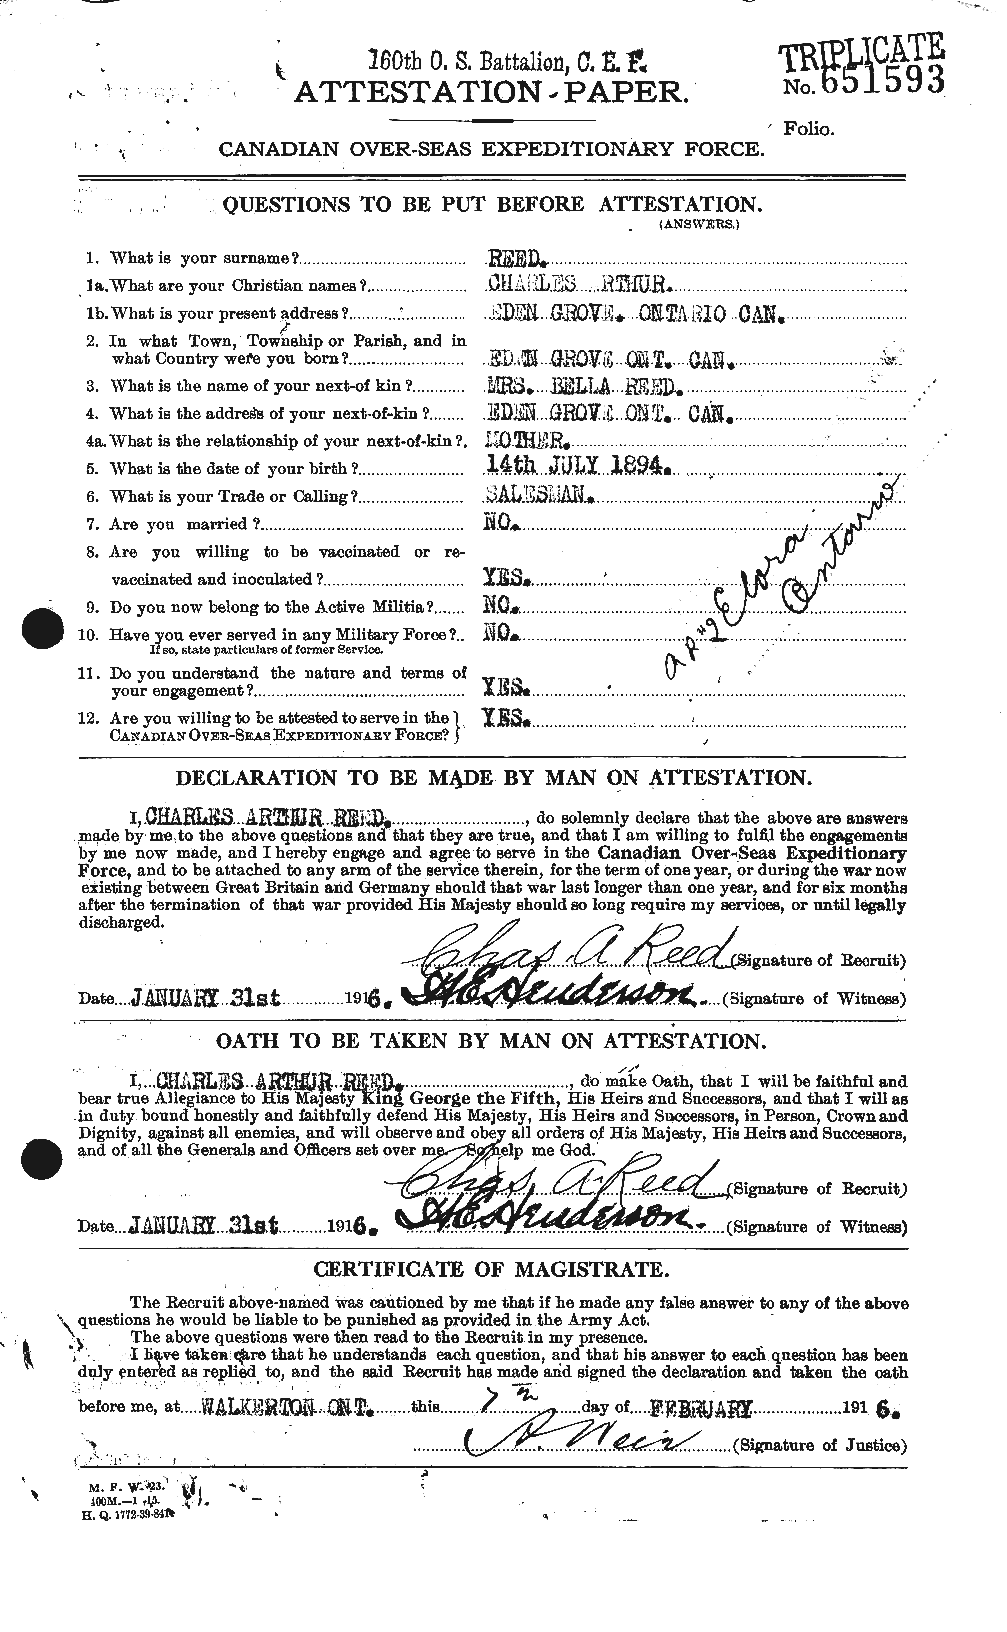 Personnel Records of the First World War - CEF 596327a